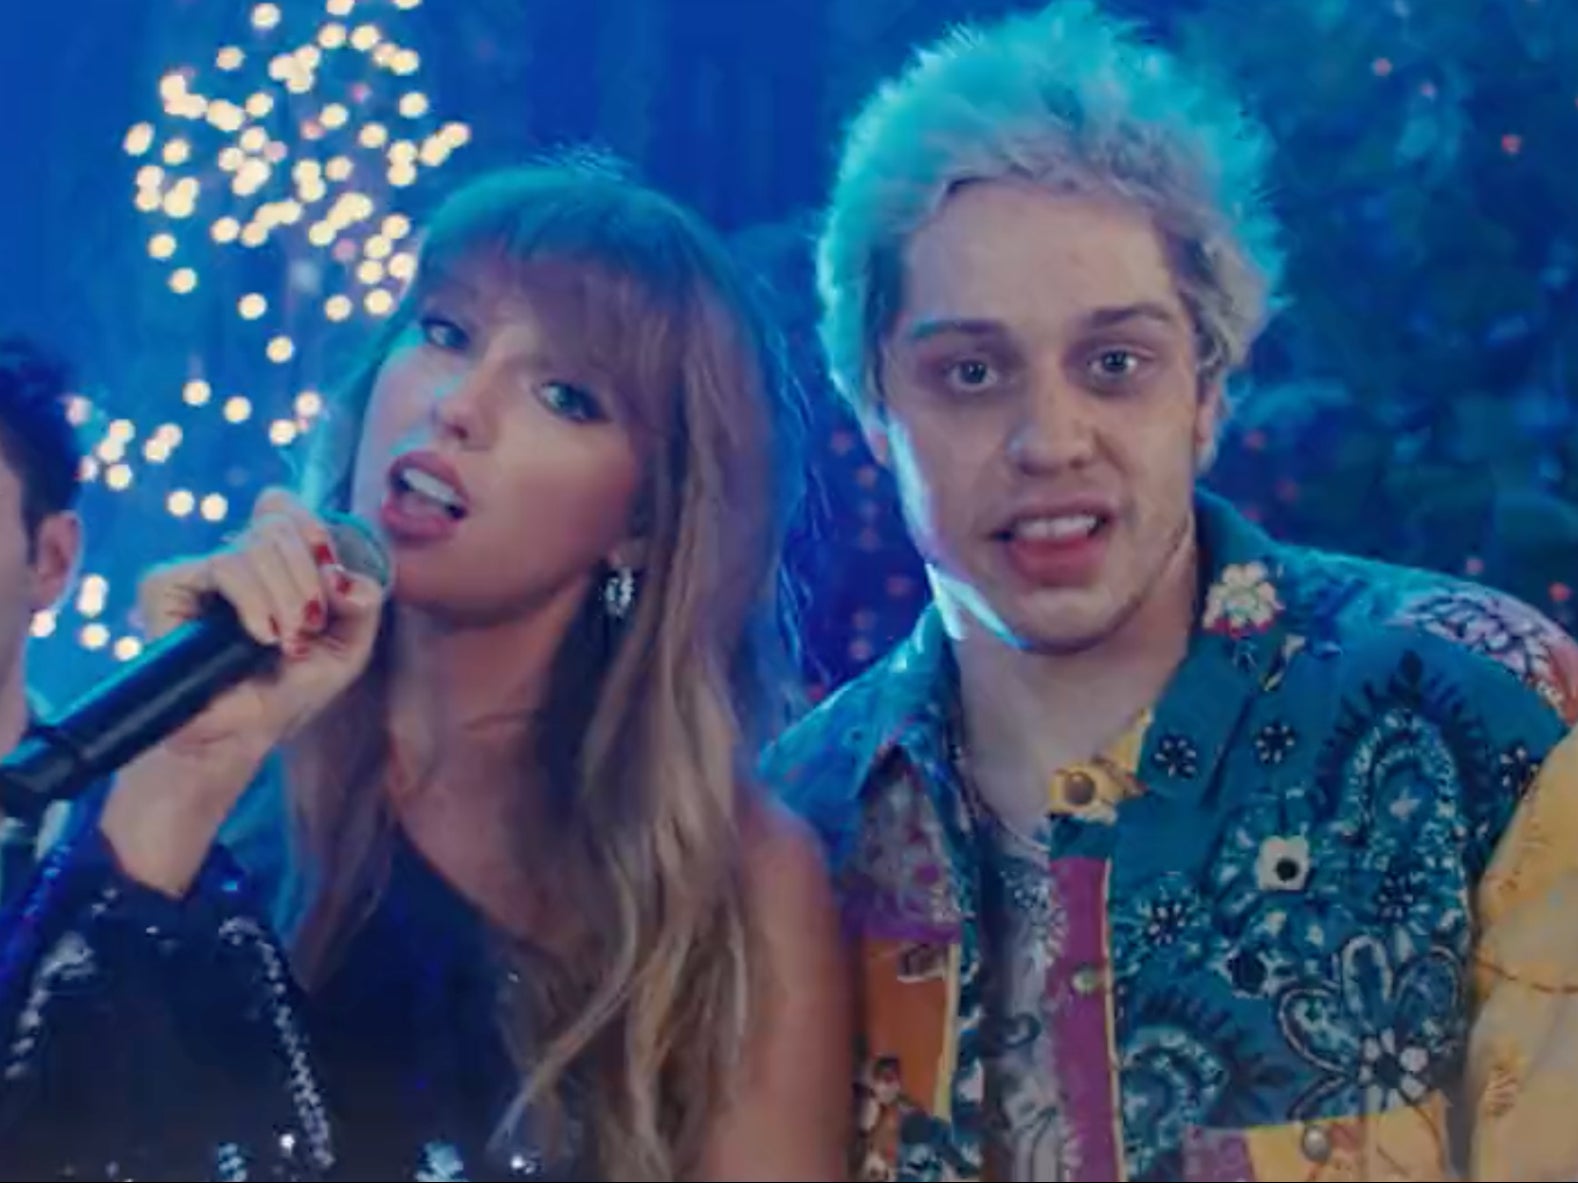 SNL Taylor Swift joins Pete Davidson in musical skit about ‘three sad